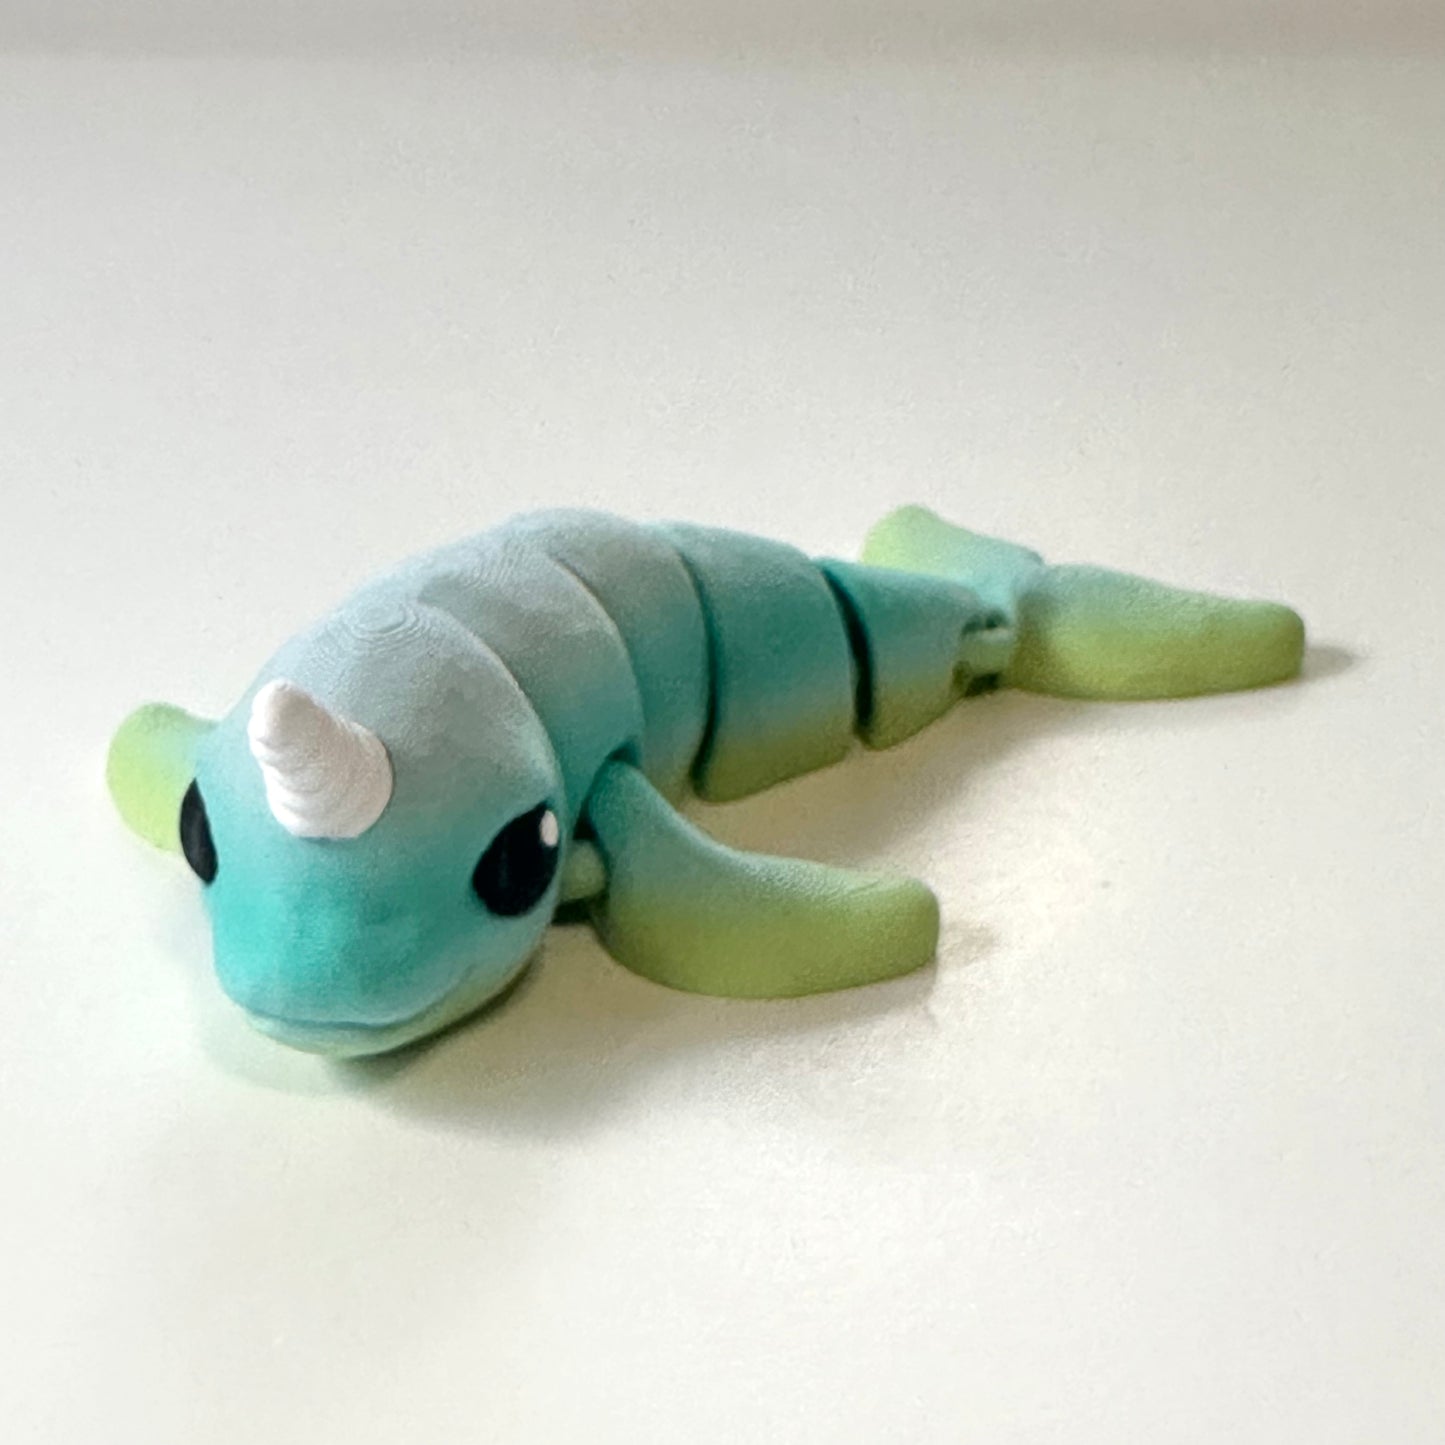 Narwhal - 3D Printed Articulating Figure